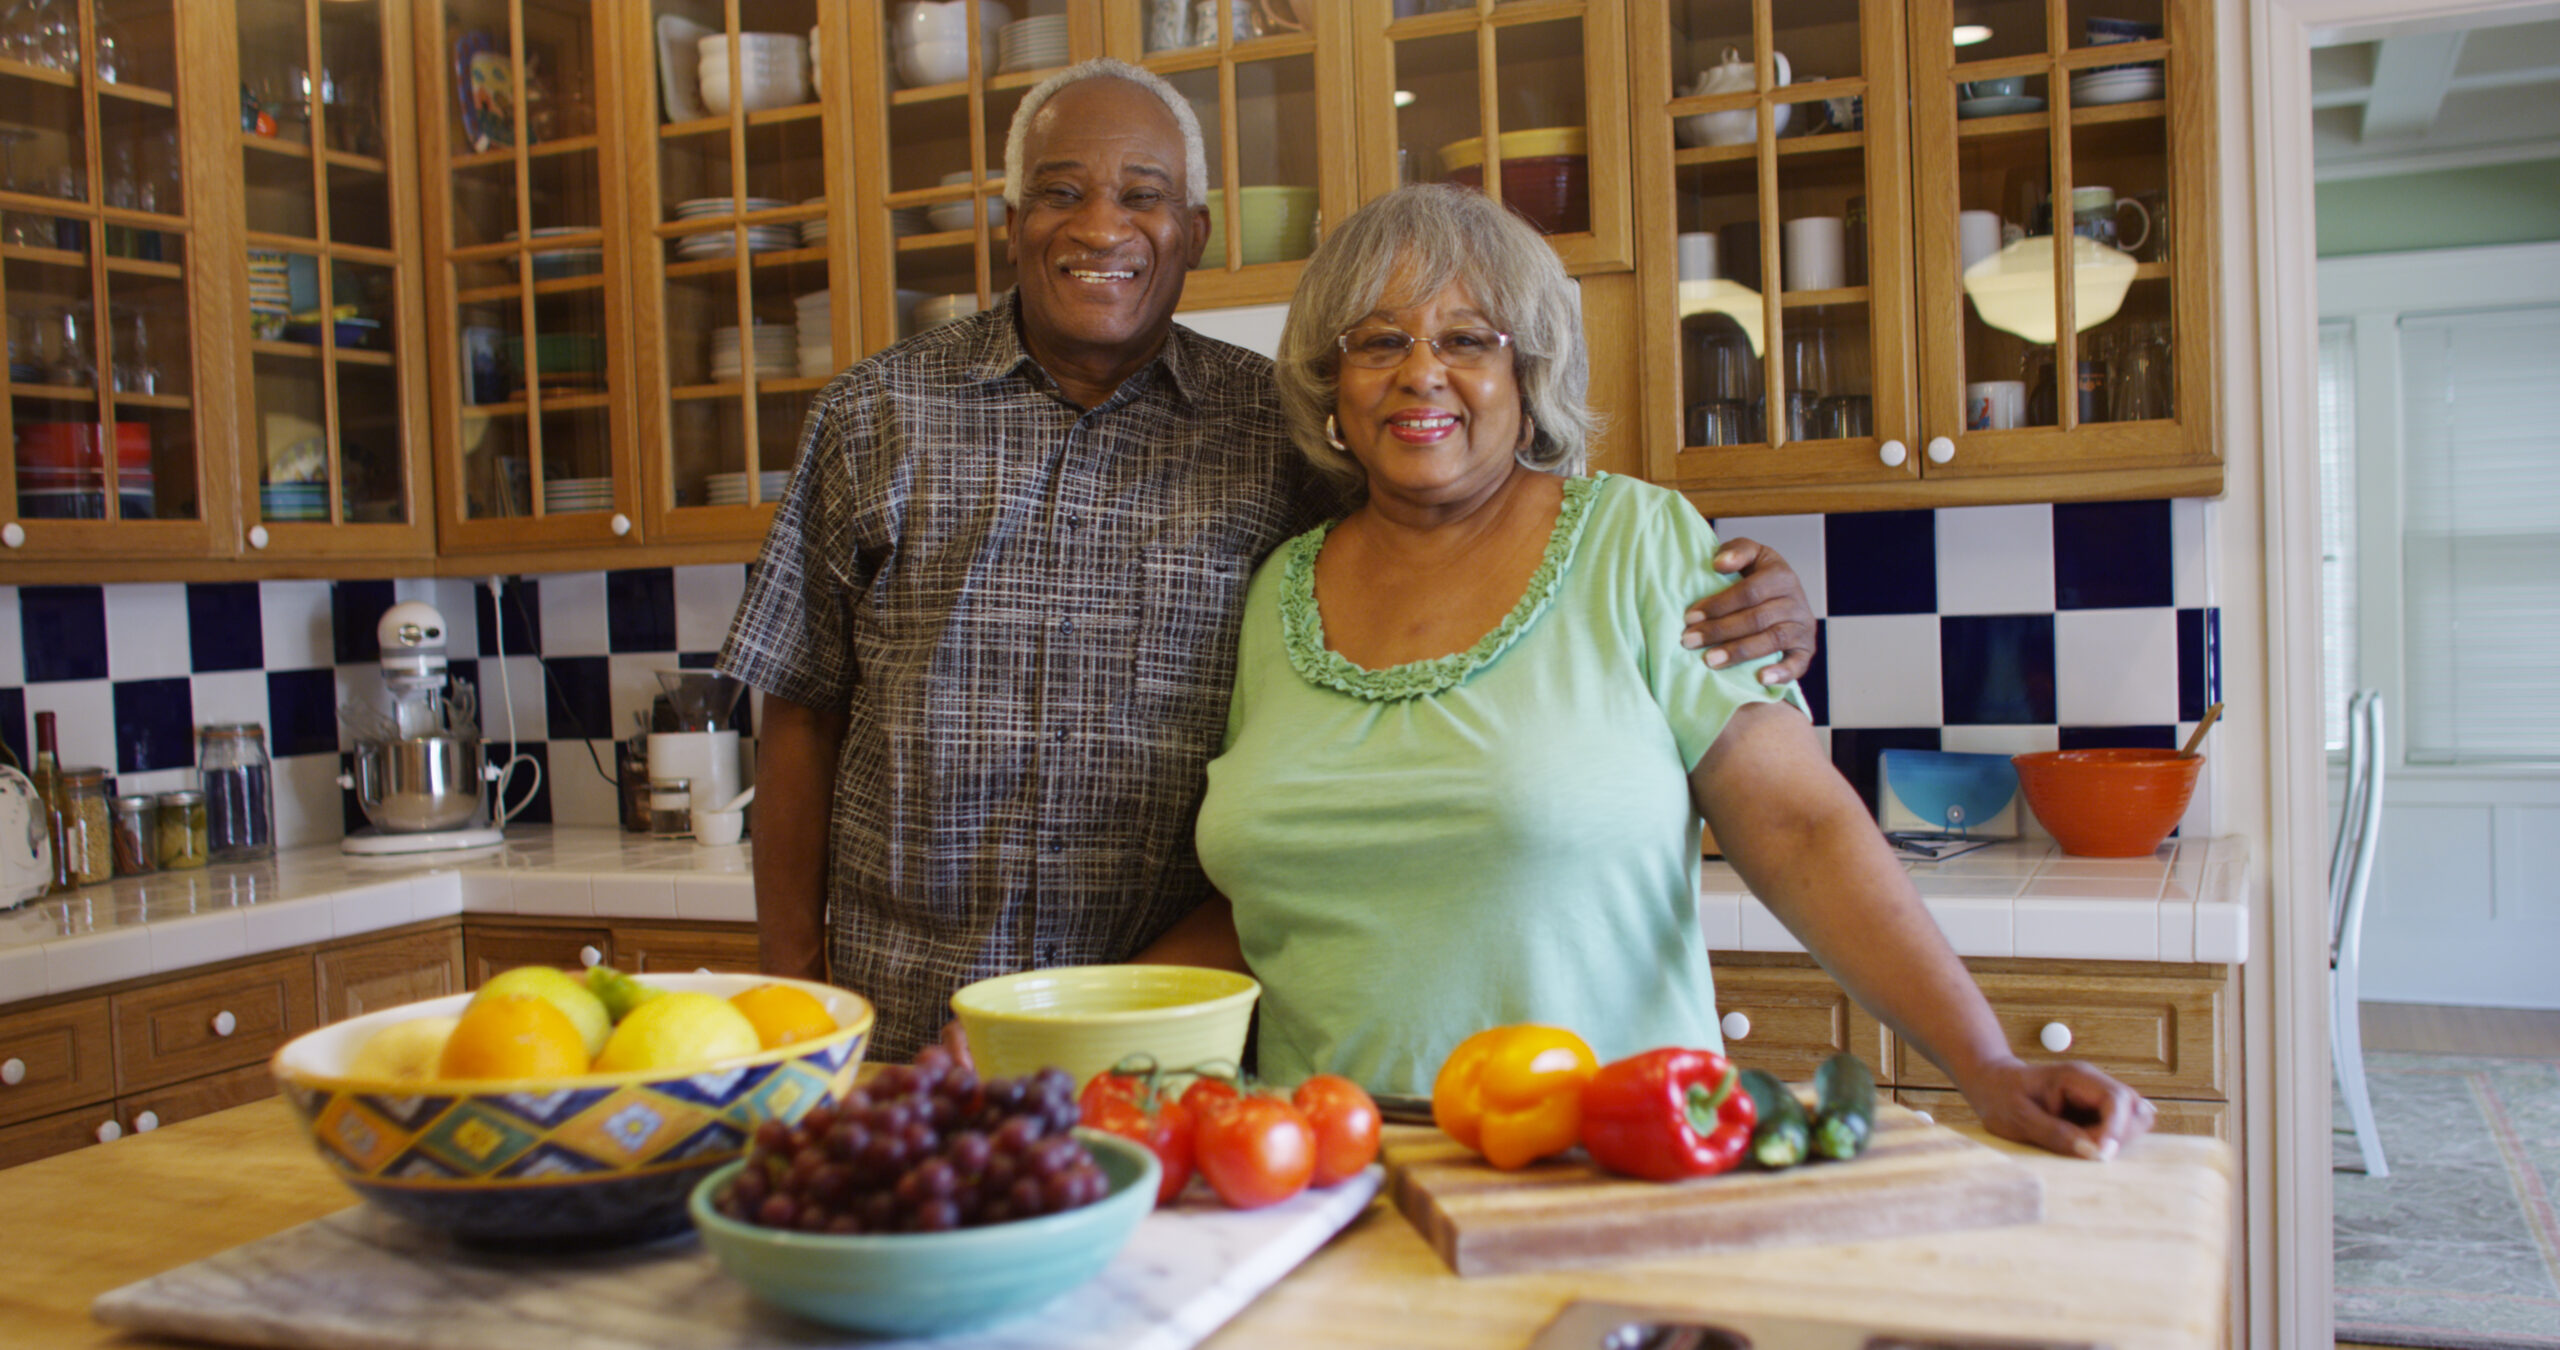 You are currently viewing Healthy Aging Month: Maintaining Independence as You Age with Tips and Strategies for Successful Golden Years